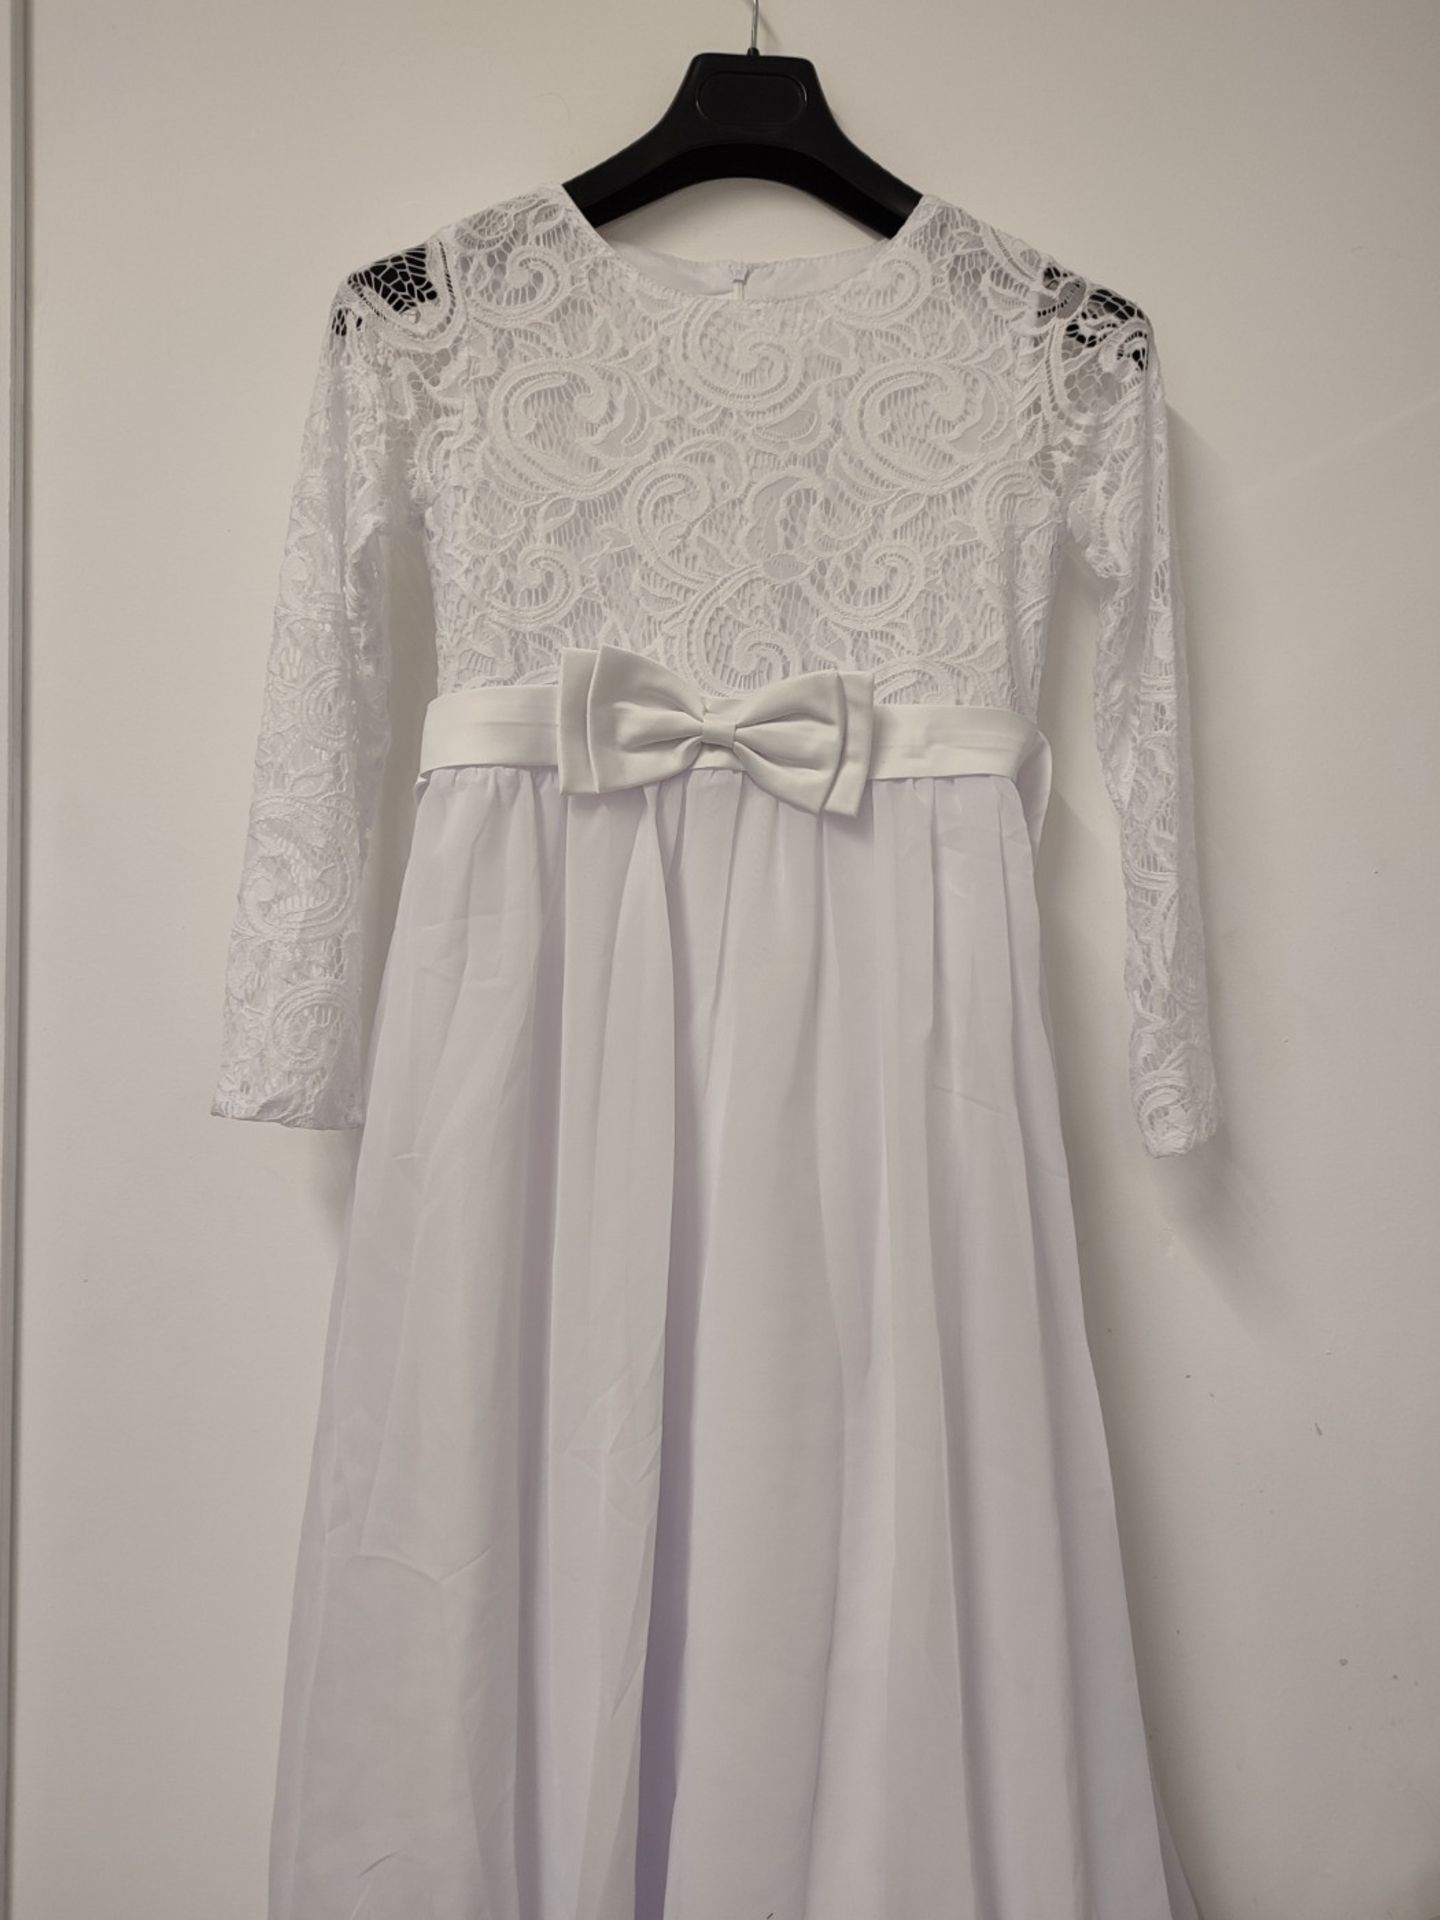 CDE Children's Boho Long Lace Dress 3/4 Sleeve Chiffon Dress with Belt and Bow/Chic A- - Image 2 of 2